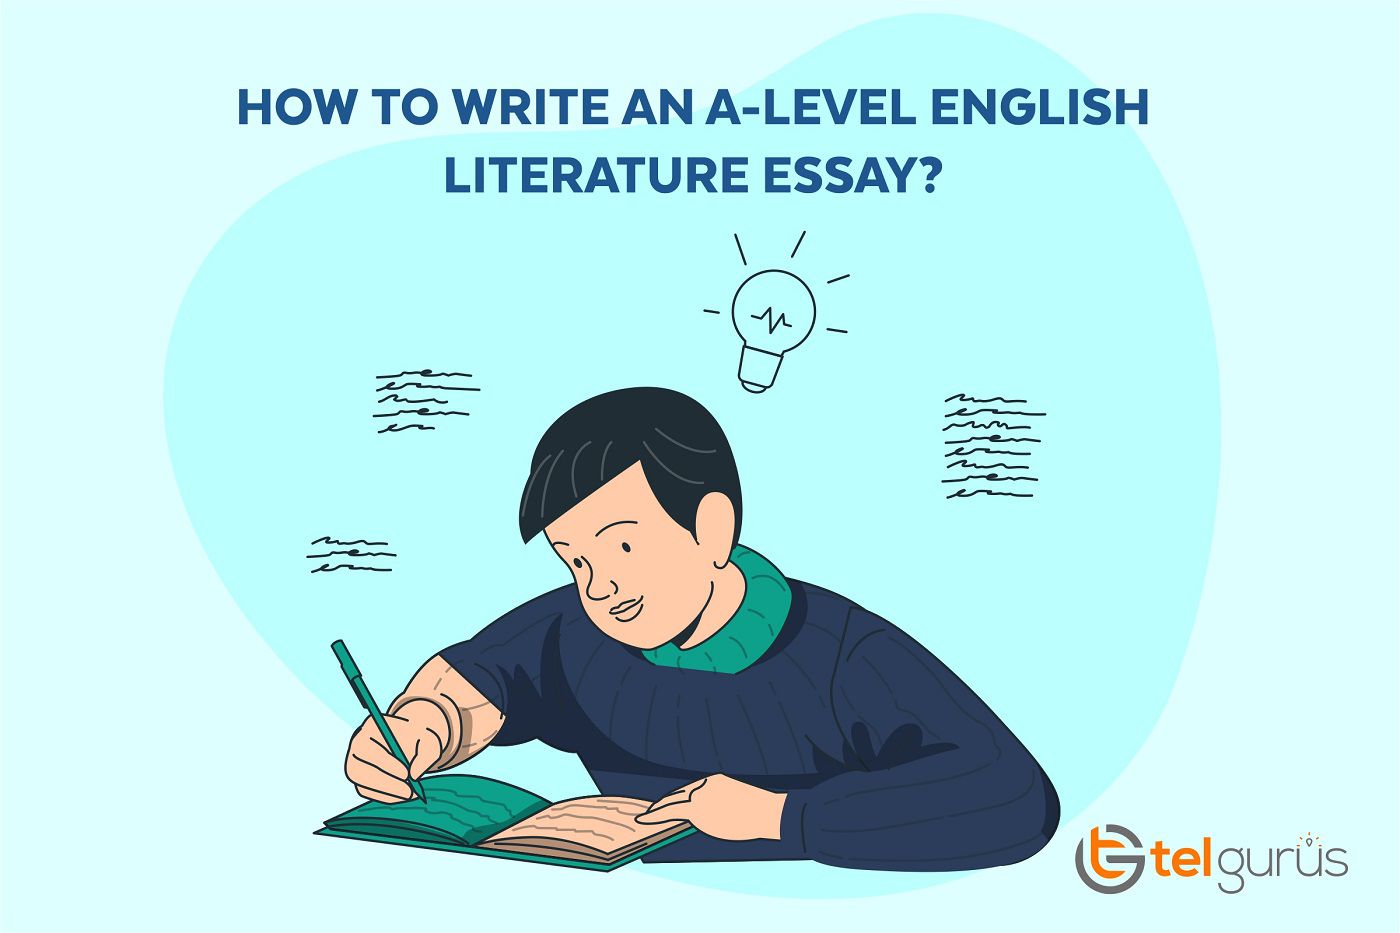 How To Write An A-Level English Literature Essay?